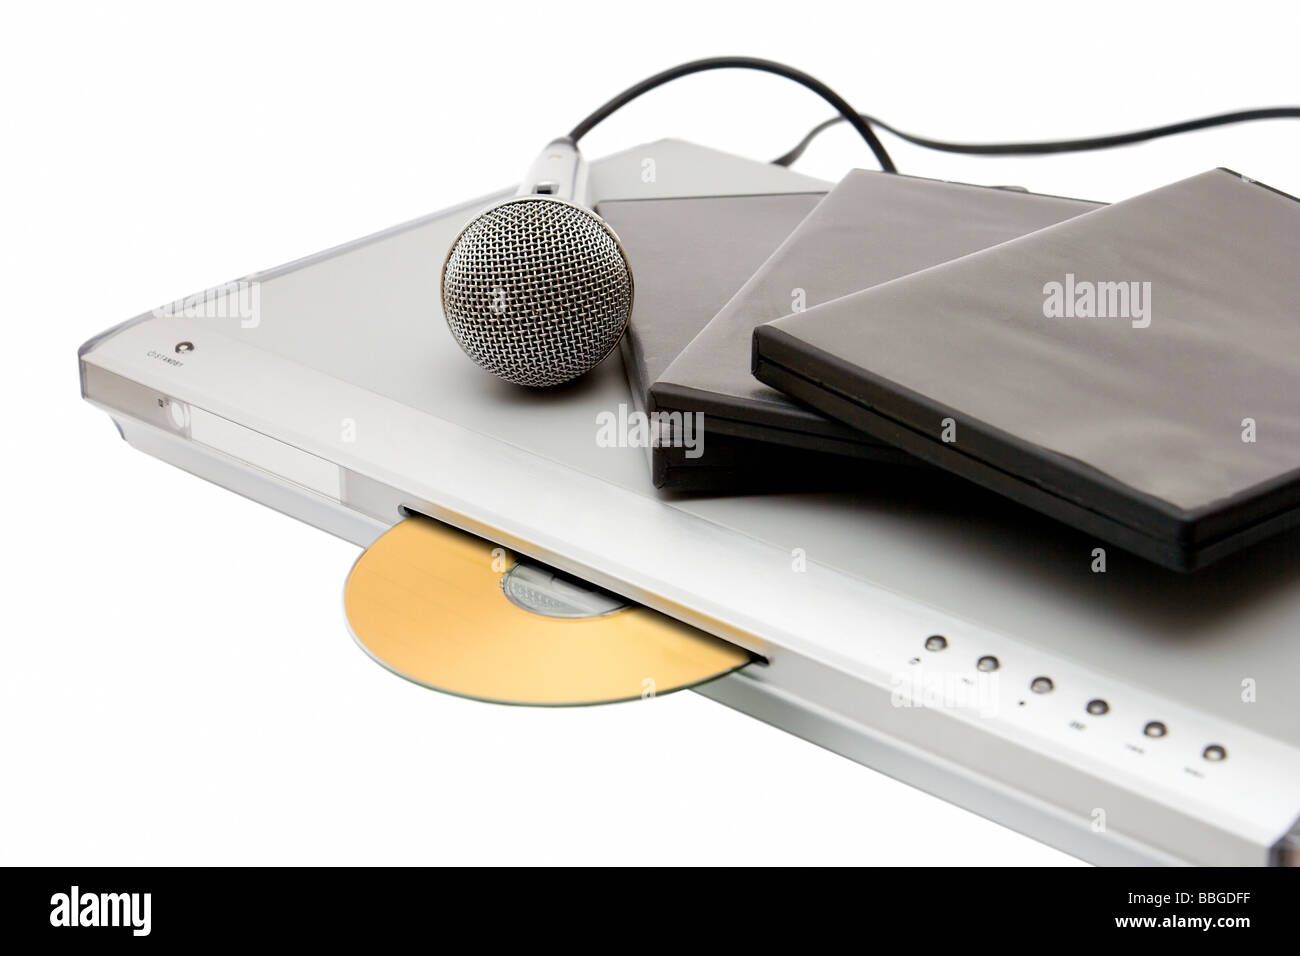 Modern dvd player with karaoke function and microphone Stock Photo - Alamy